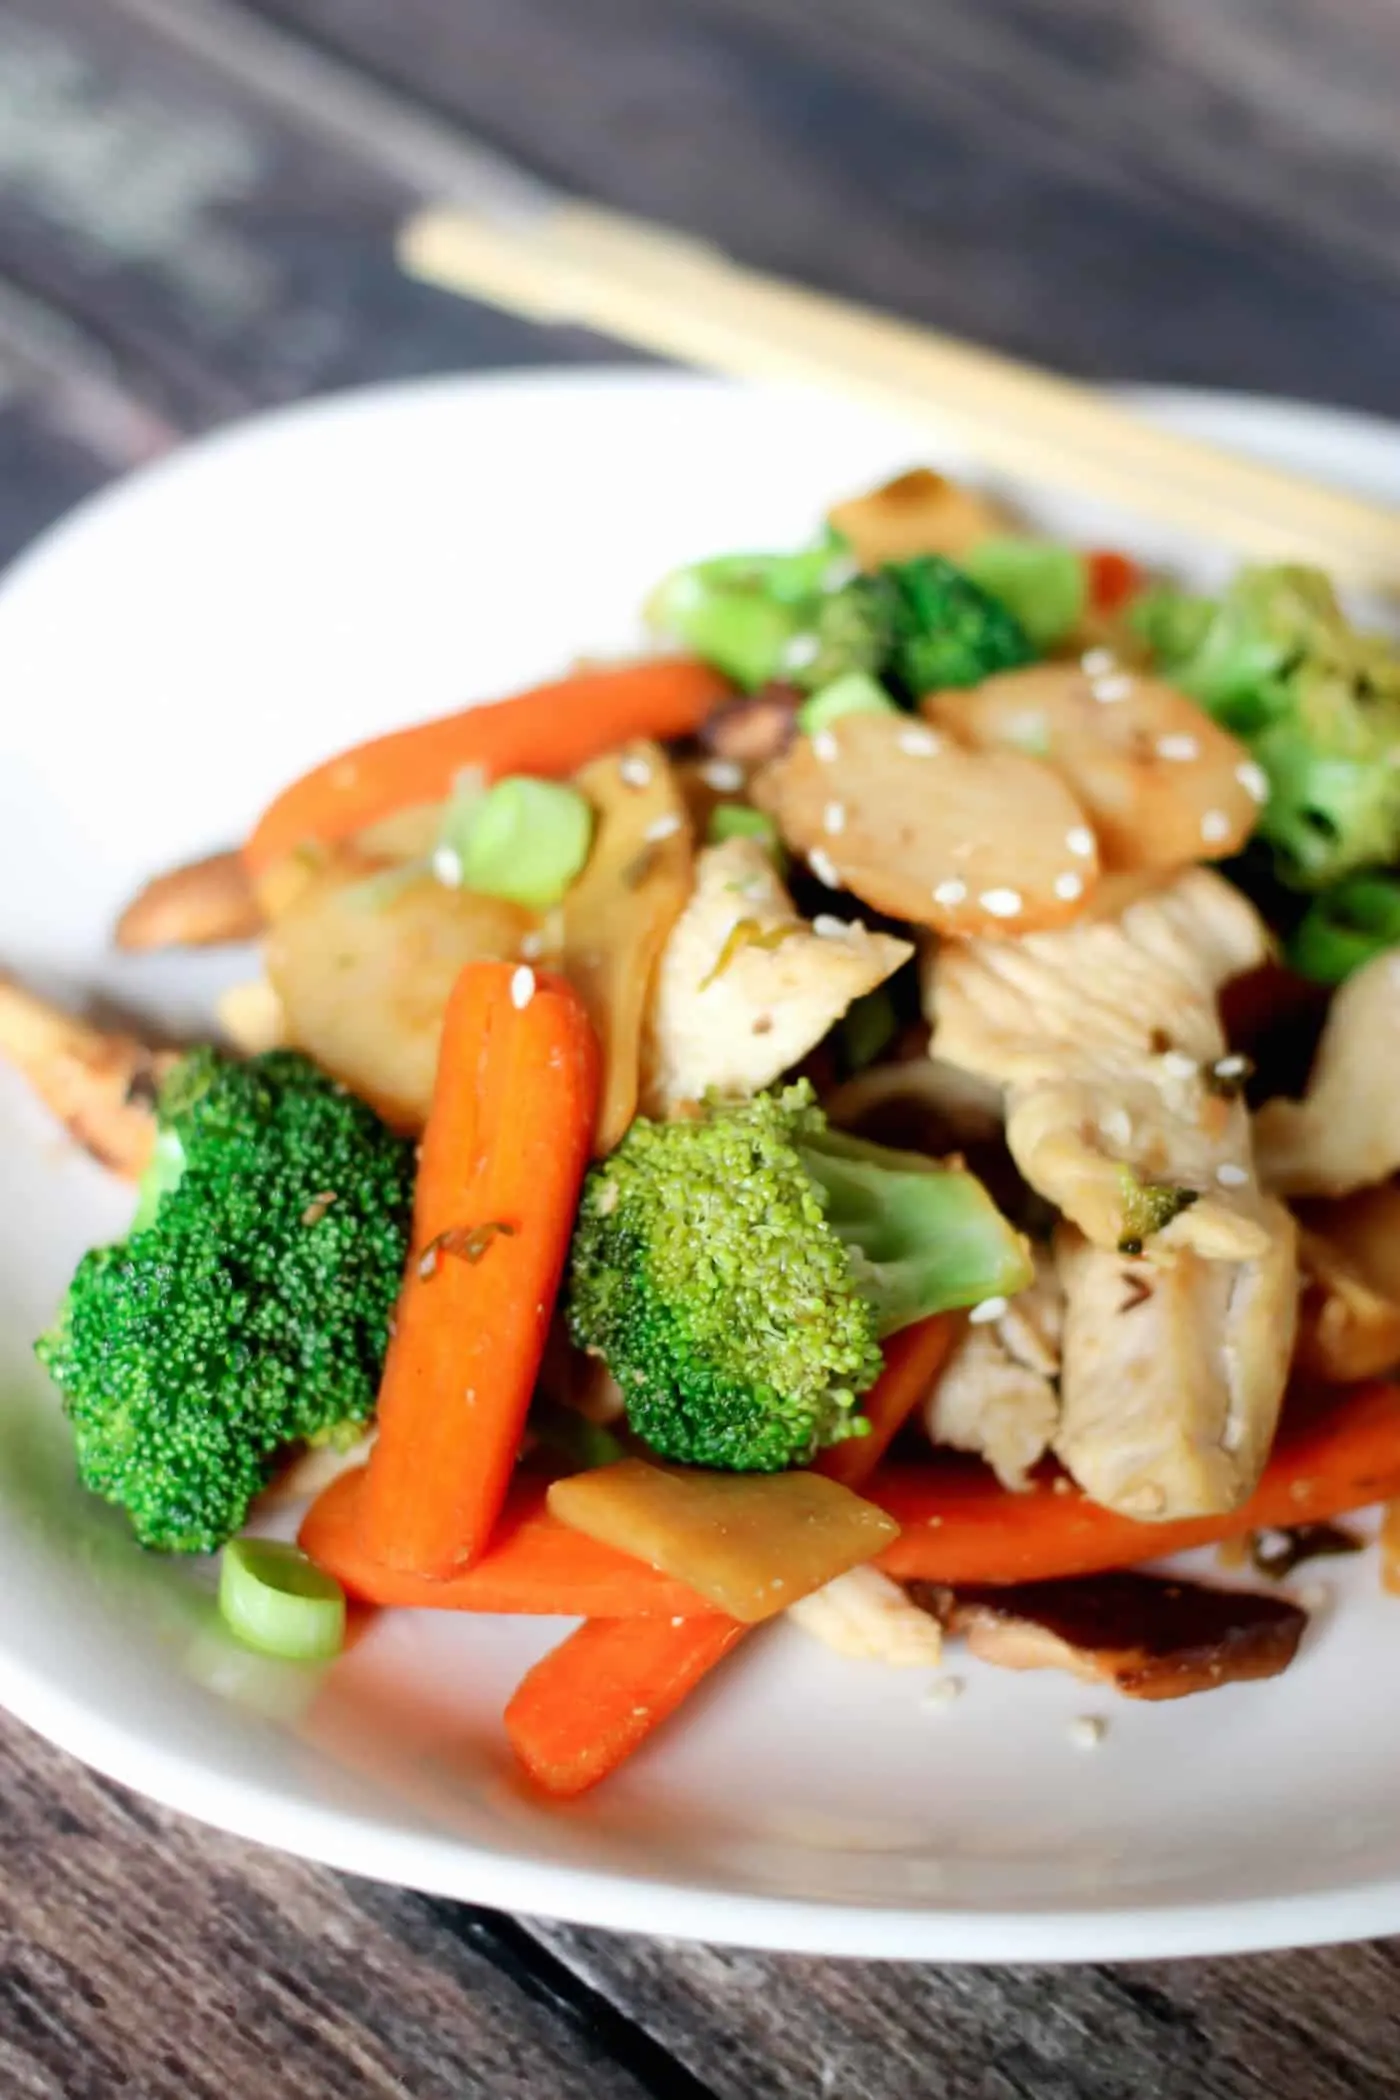 Healthy stir fry recipe with chicken and vegetables